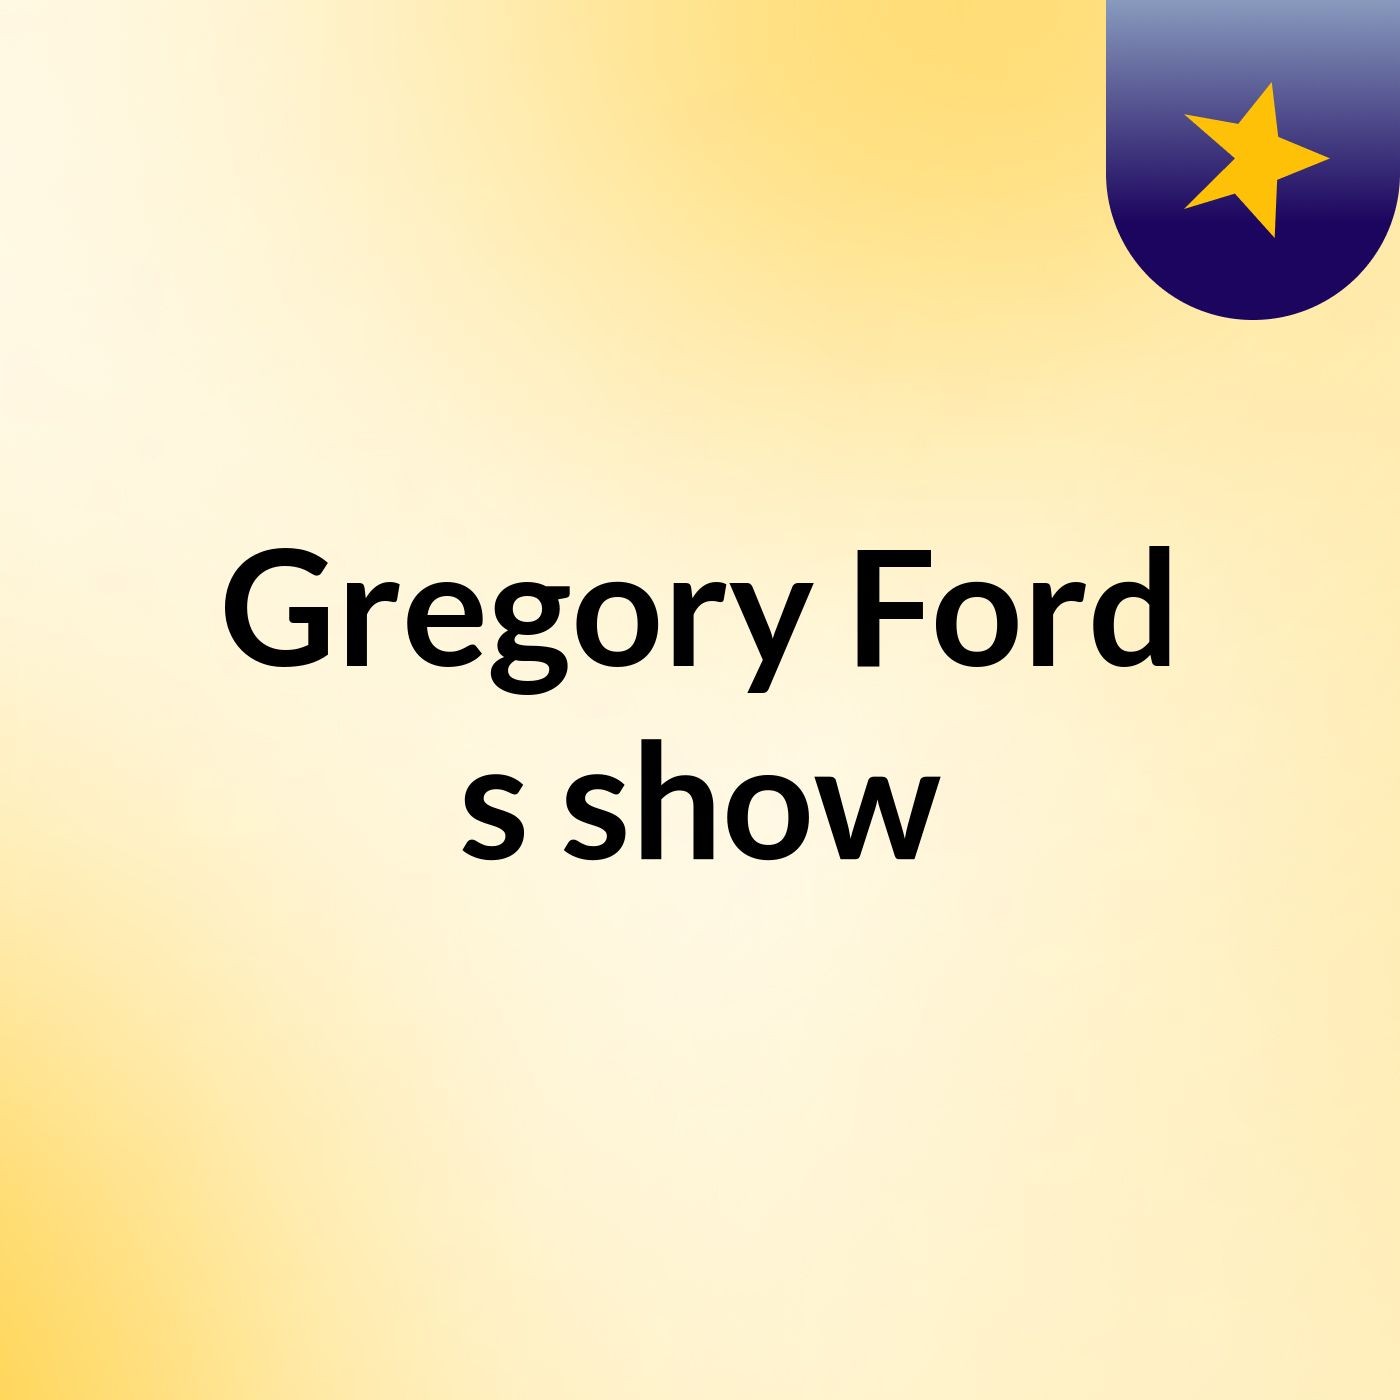 Episode 14 - Gregory Ford's show